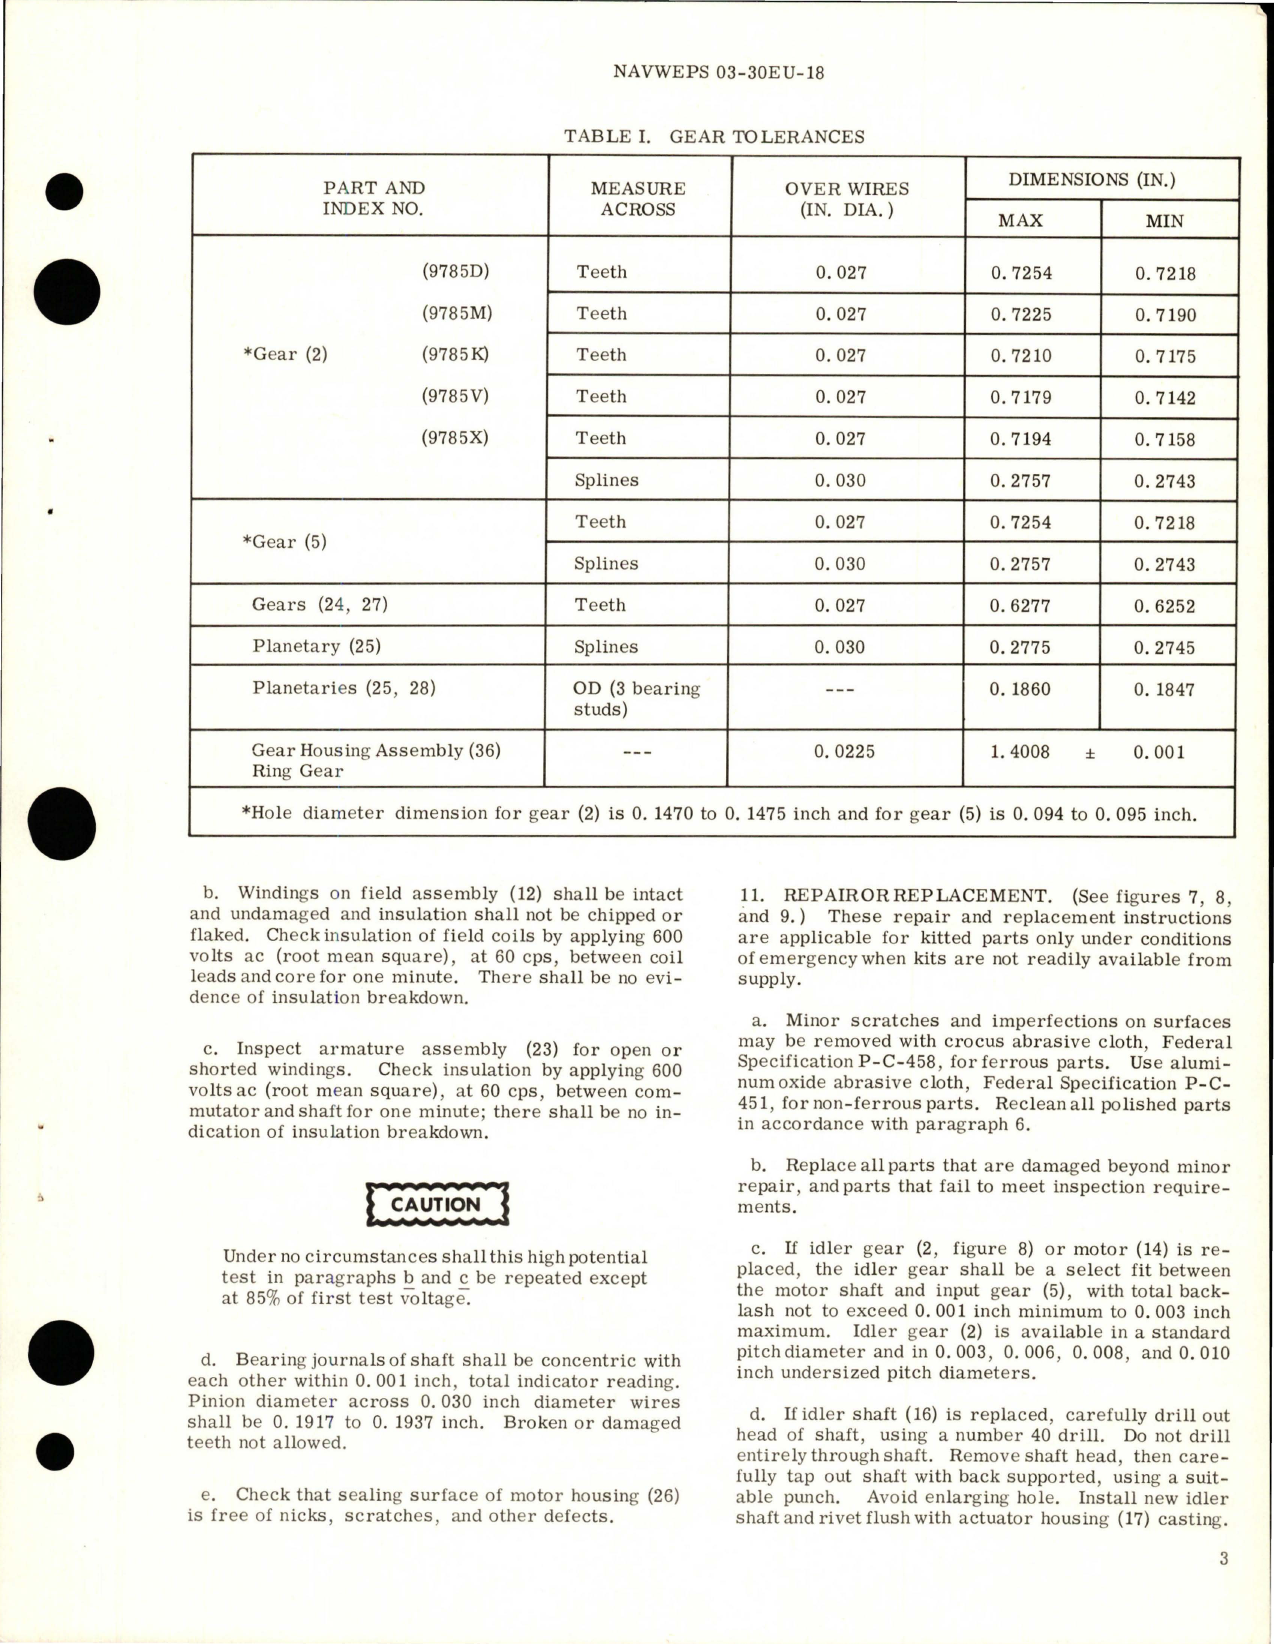 Sample page 5 from AirCorps Library document: Overhaul Instructions with Parts Breakdown for Motor Operated Gate Valve - Part AV16B1638B